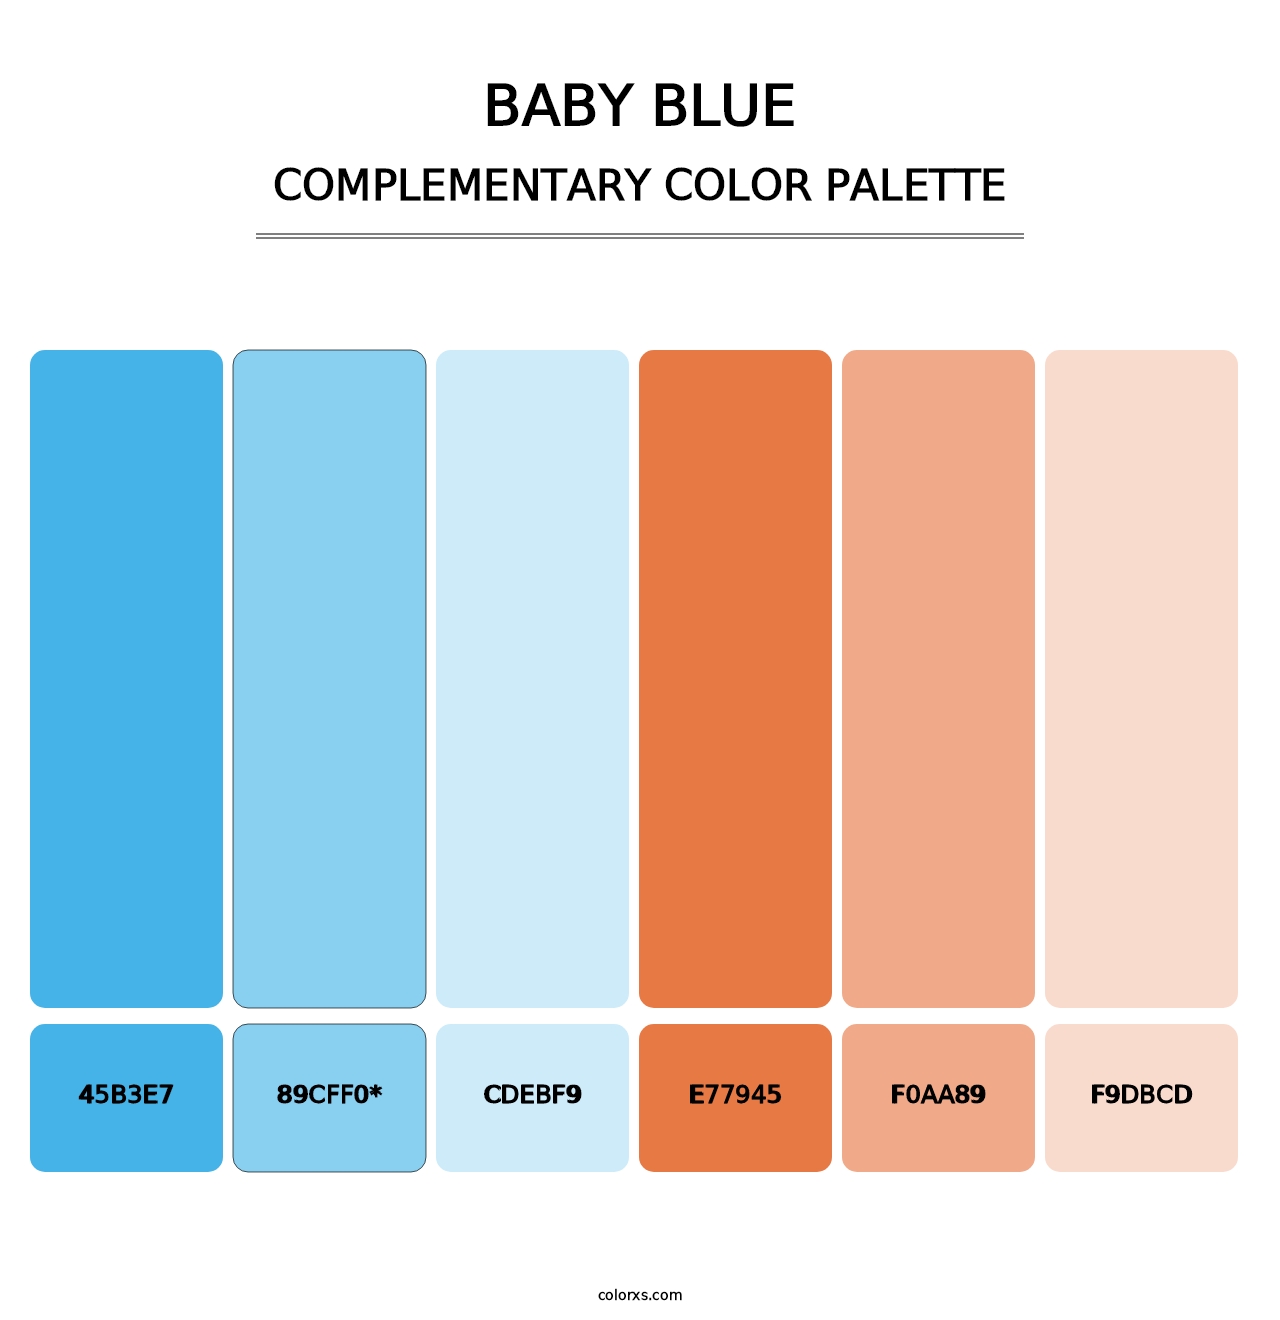 Baby Blue - Complementary Color Palette